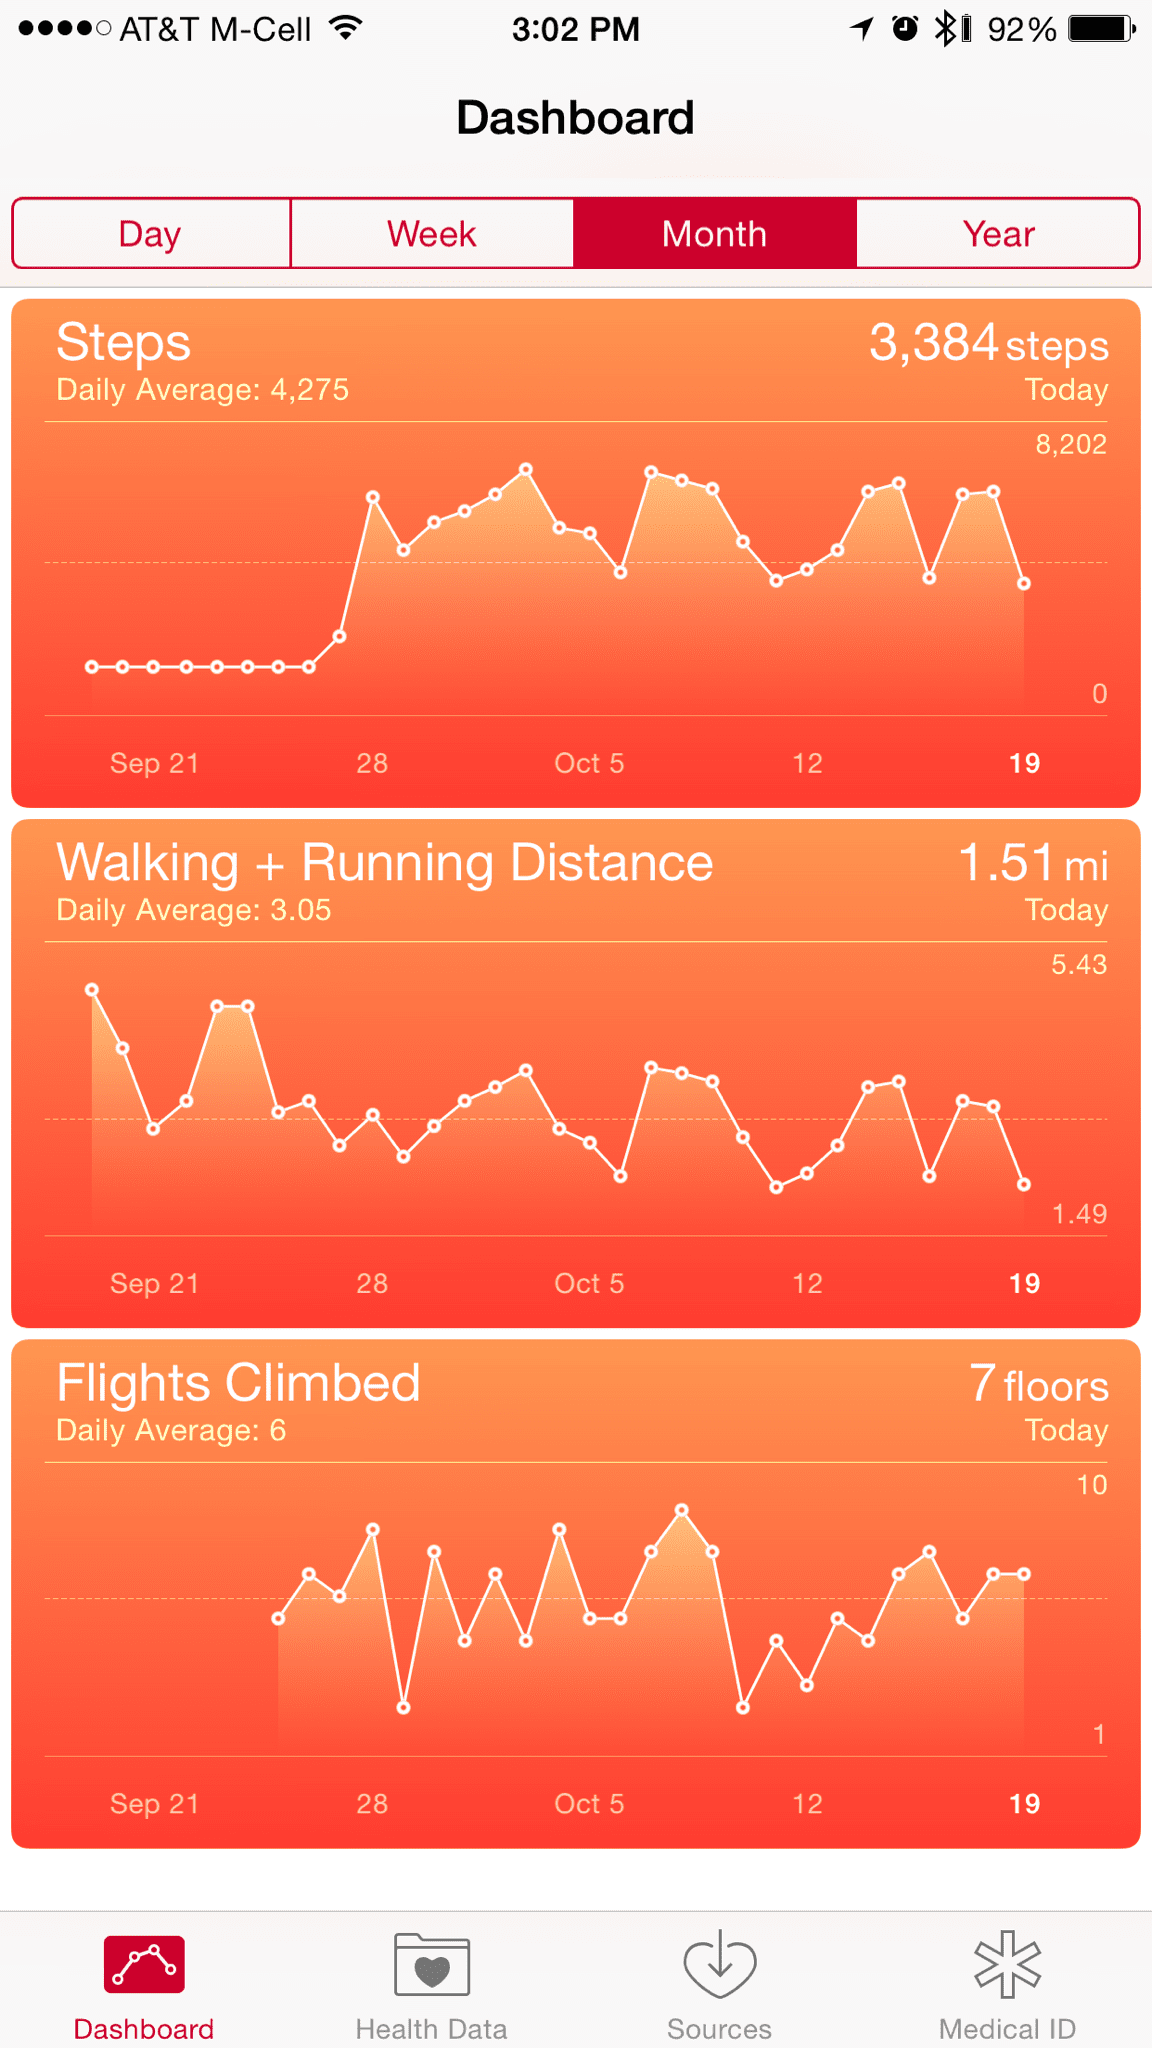 Sigh. I can do better. #exercise